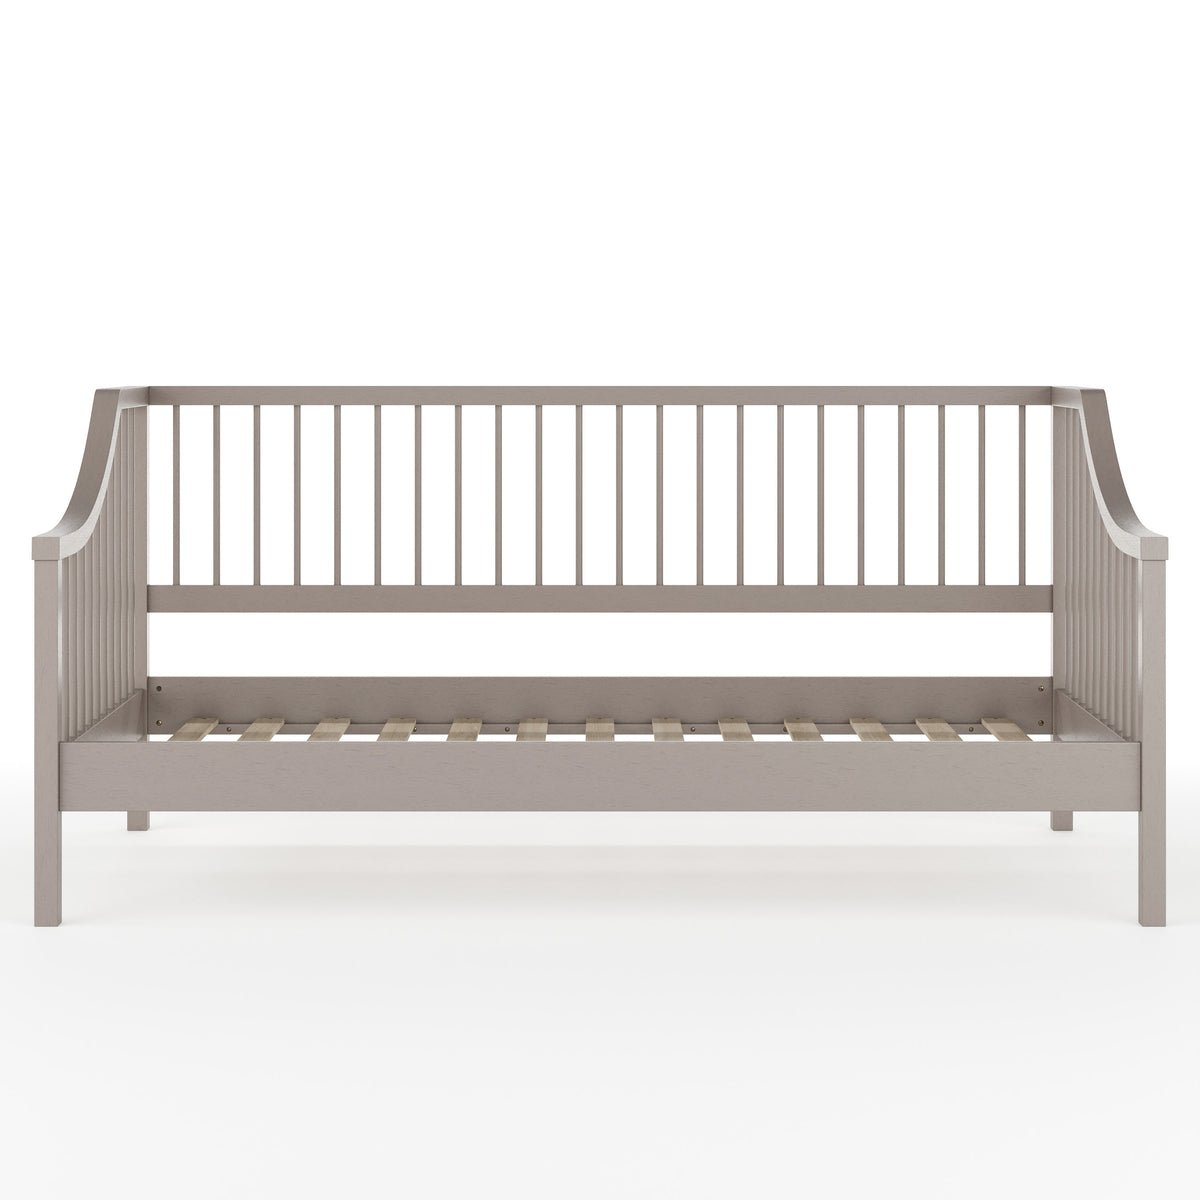 Gray |#| Wooden Twin Size Platform Daybed with Spindles and Wood Slat Foundation in Gray